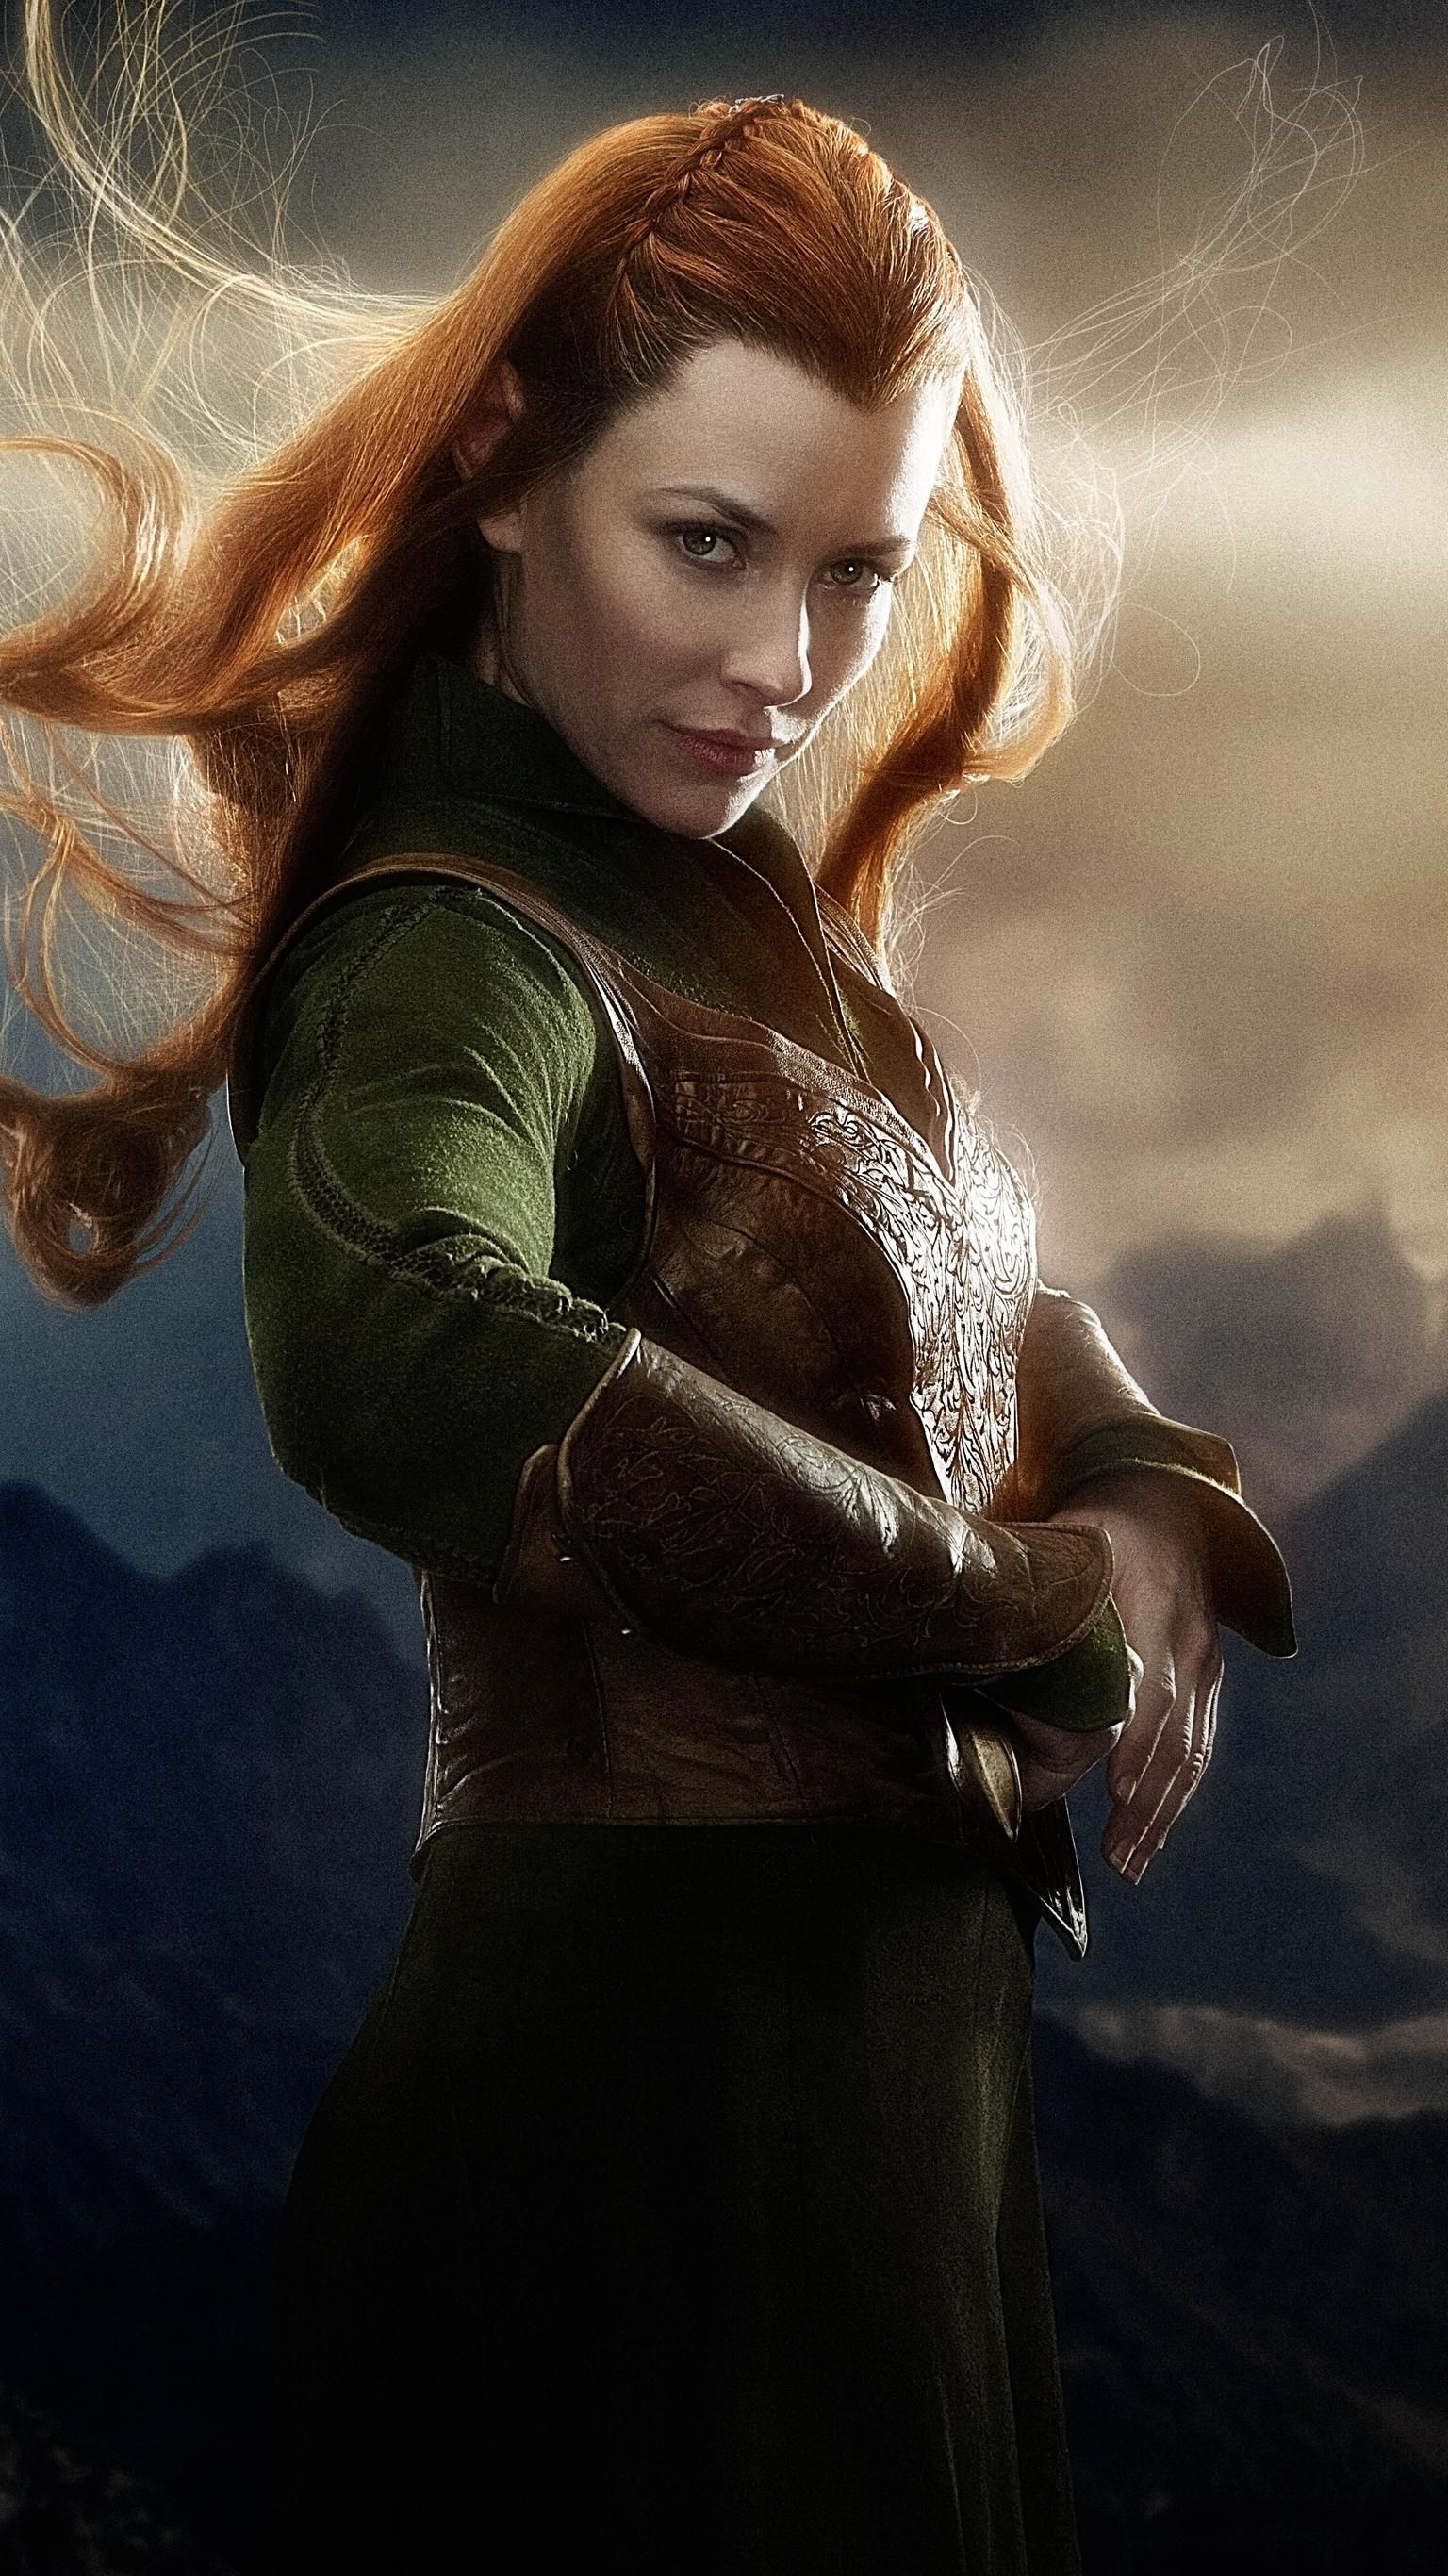 Tauriel in The Hobbit, Desolation of Smaug wallpaper, Elven warrior, Heroic and fierce, 1540x2740 HD Handy